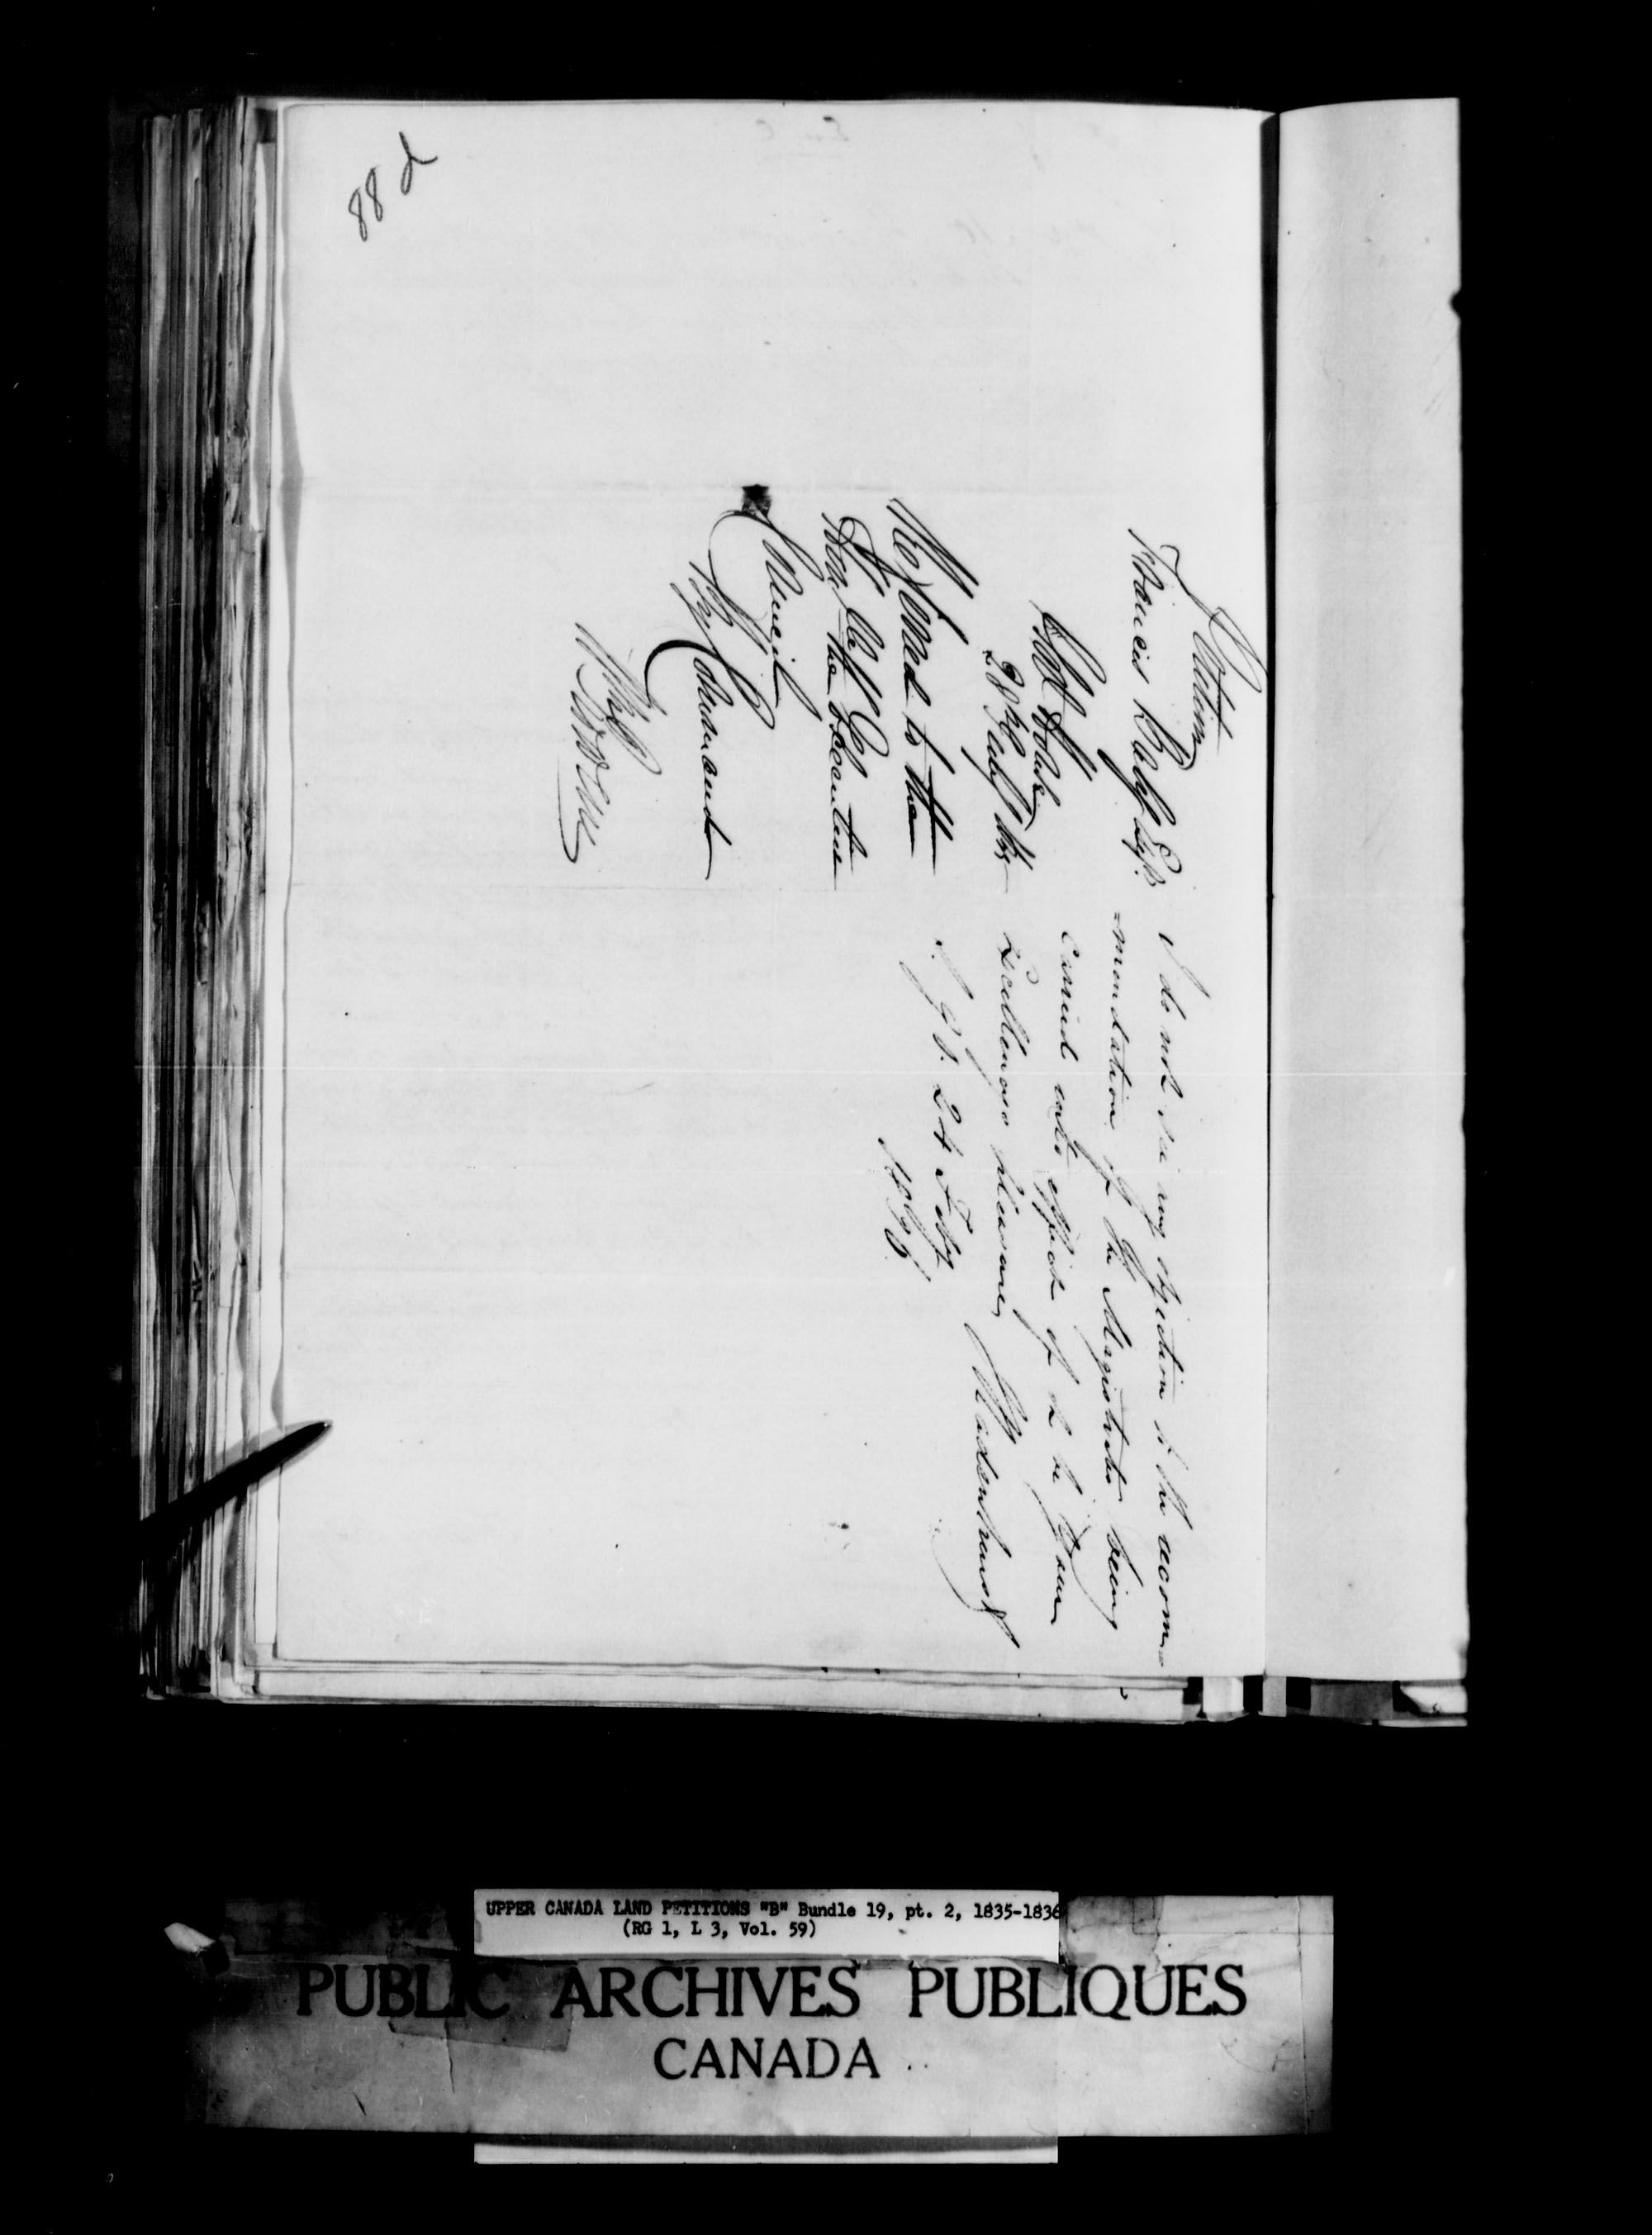 Title: Upper Canada Land Petitions (1763-1865) - Mikan Number: 205131 - Microform: c-1632